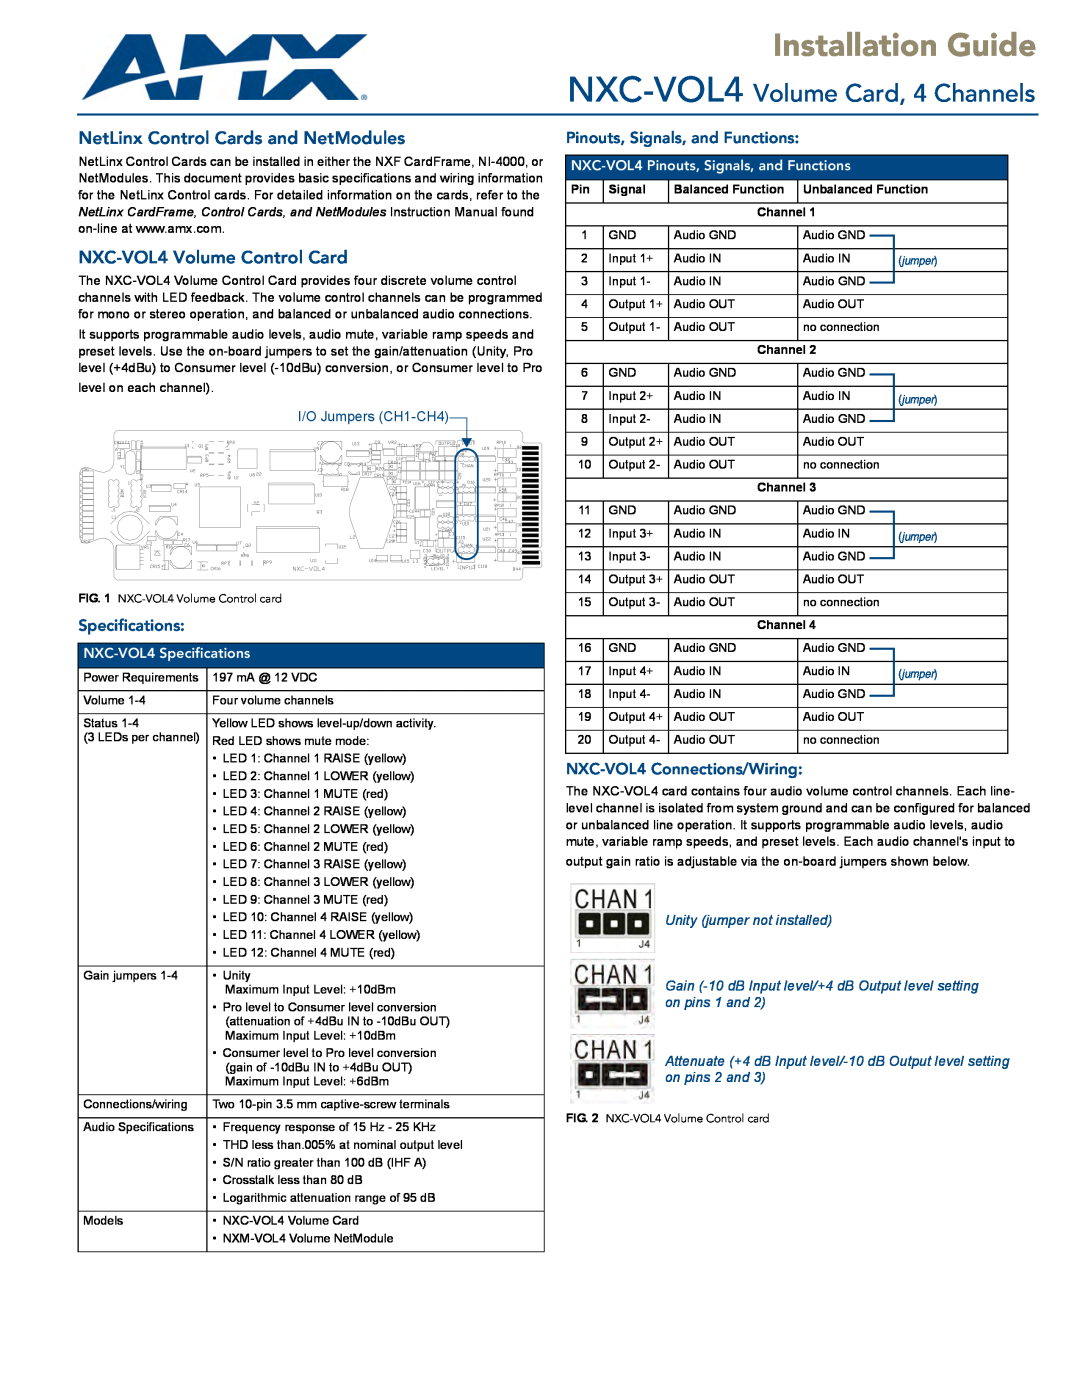 AMX specifications Specifications, Pinouts, Signals, and Functions, NXC-VOL4Connections/Wiring, I/O Jumpers CH1-CH4 